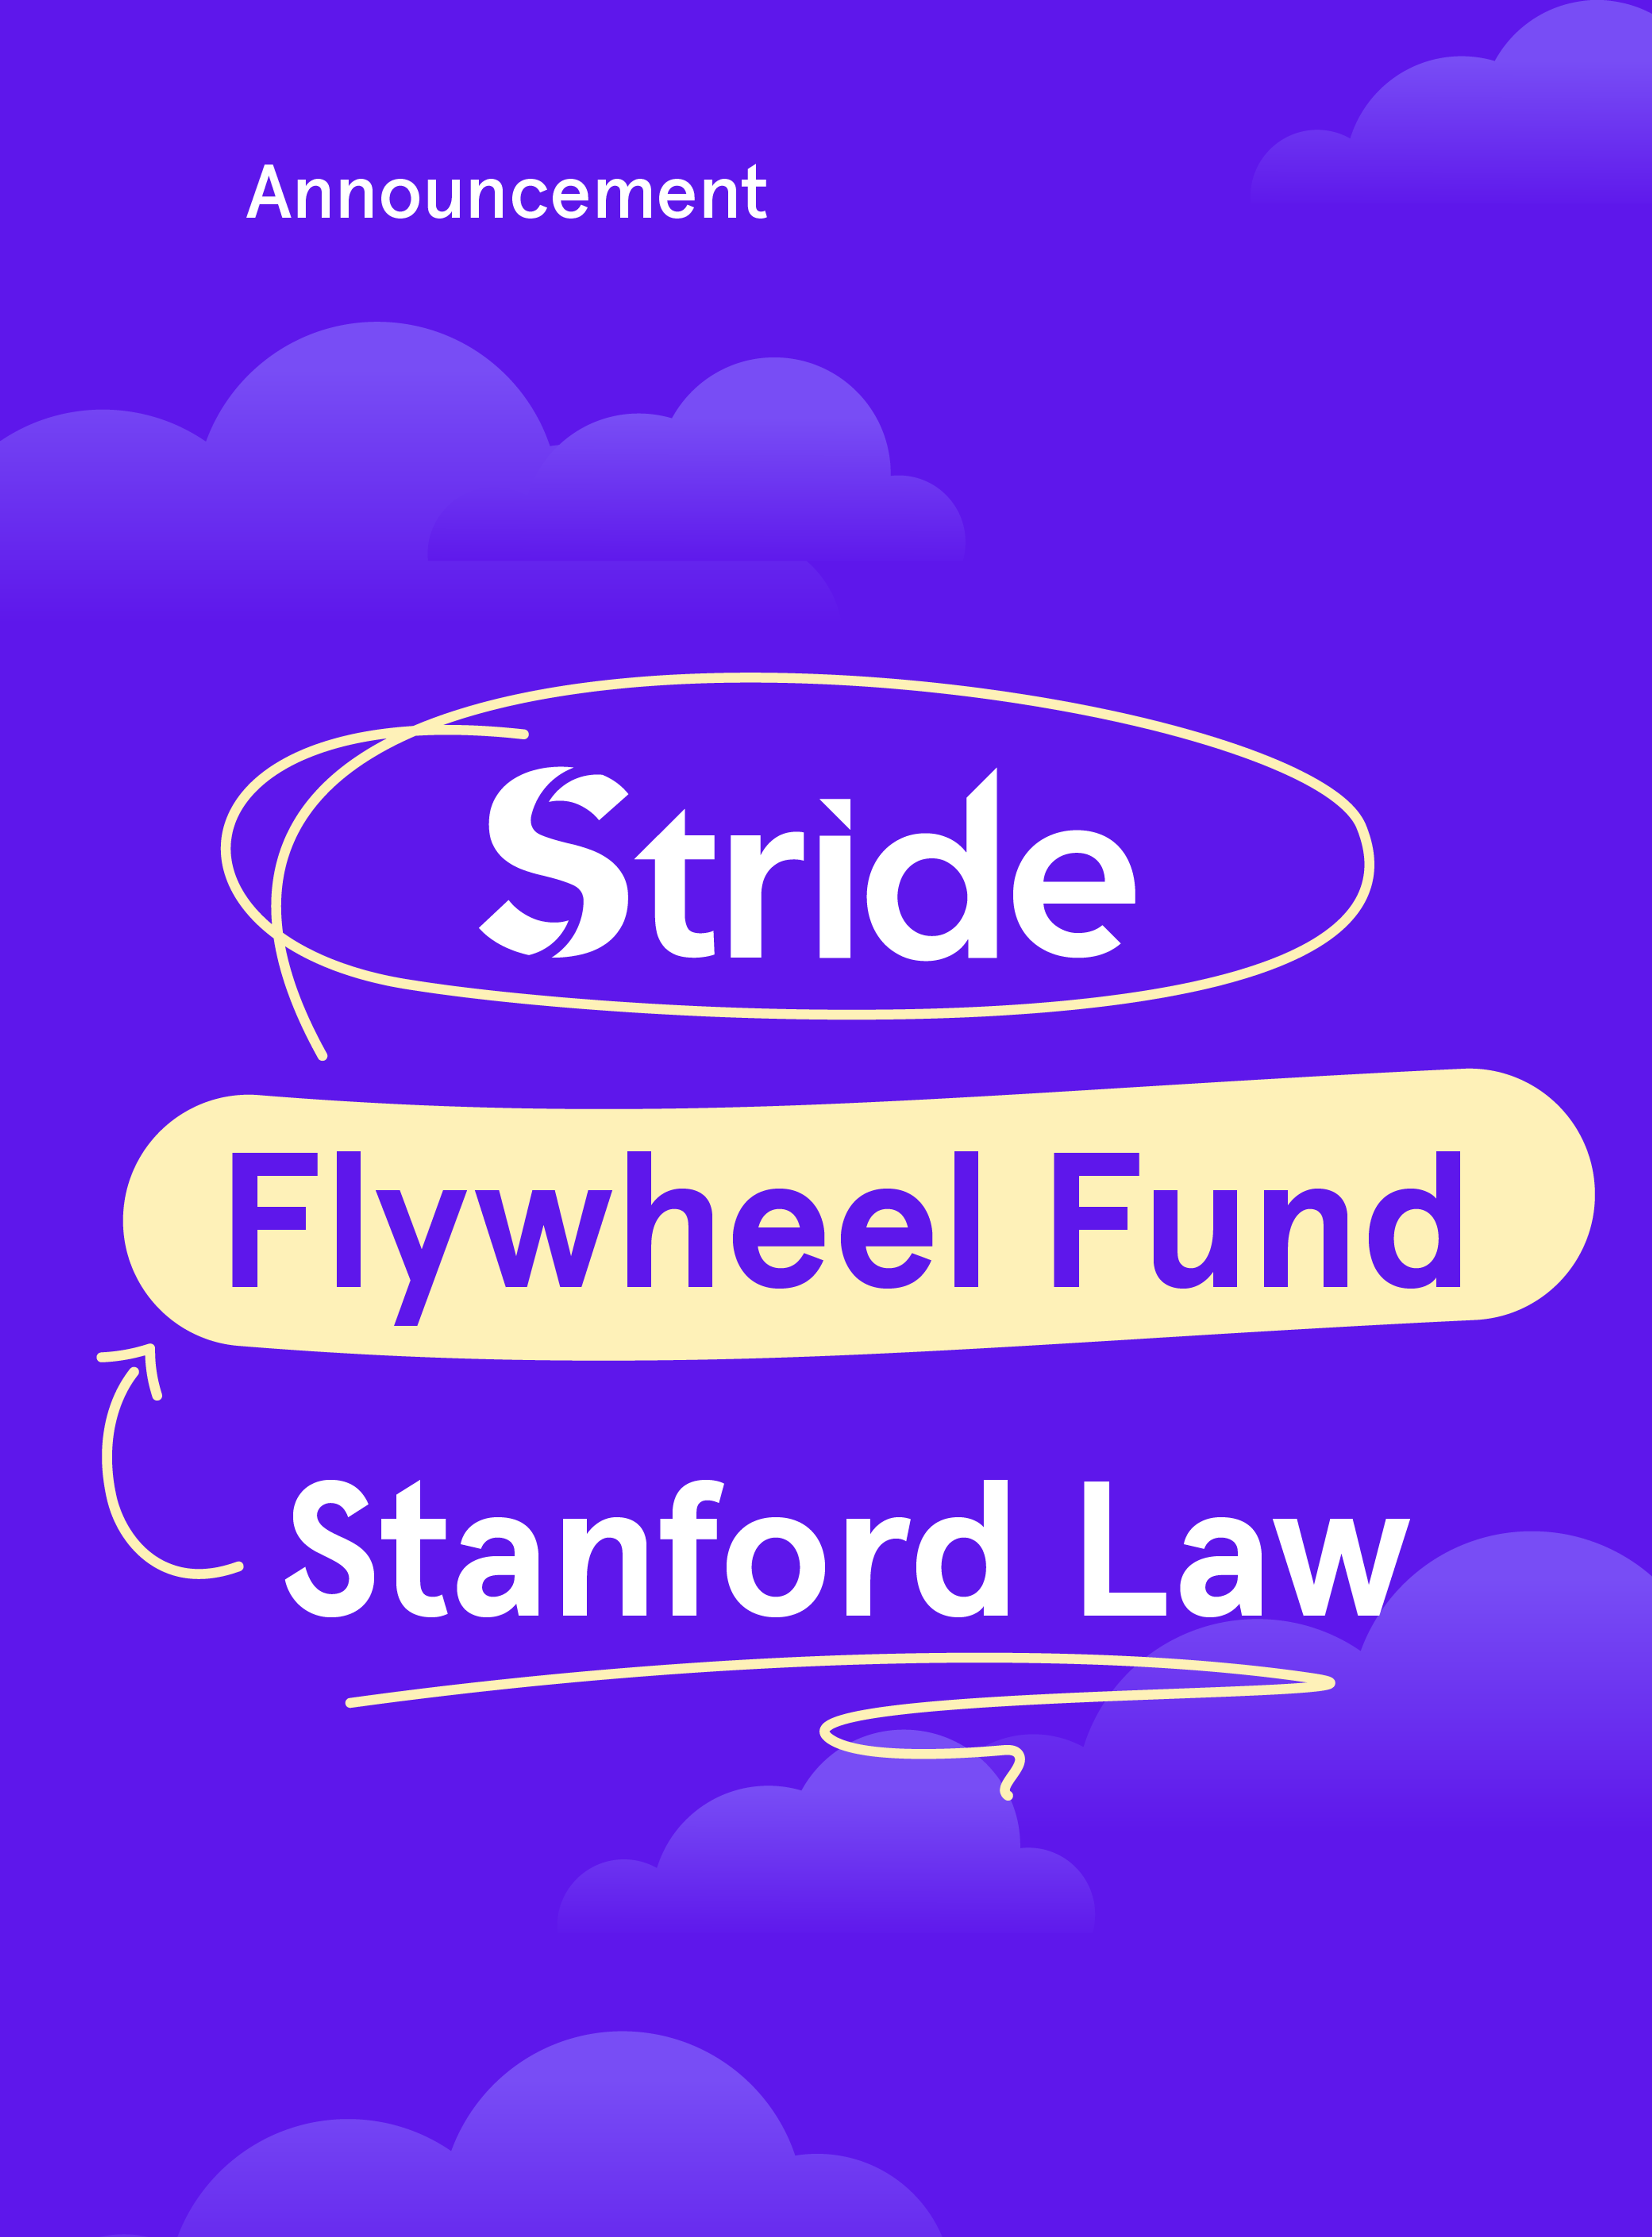 The Flywheel Fund for Career Choice, Powered by Stride Funding, Launches Pilot Program At Stanford Law School